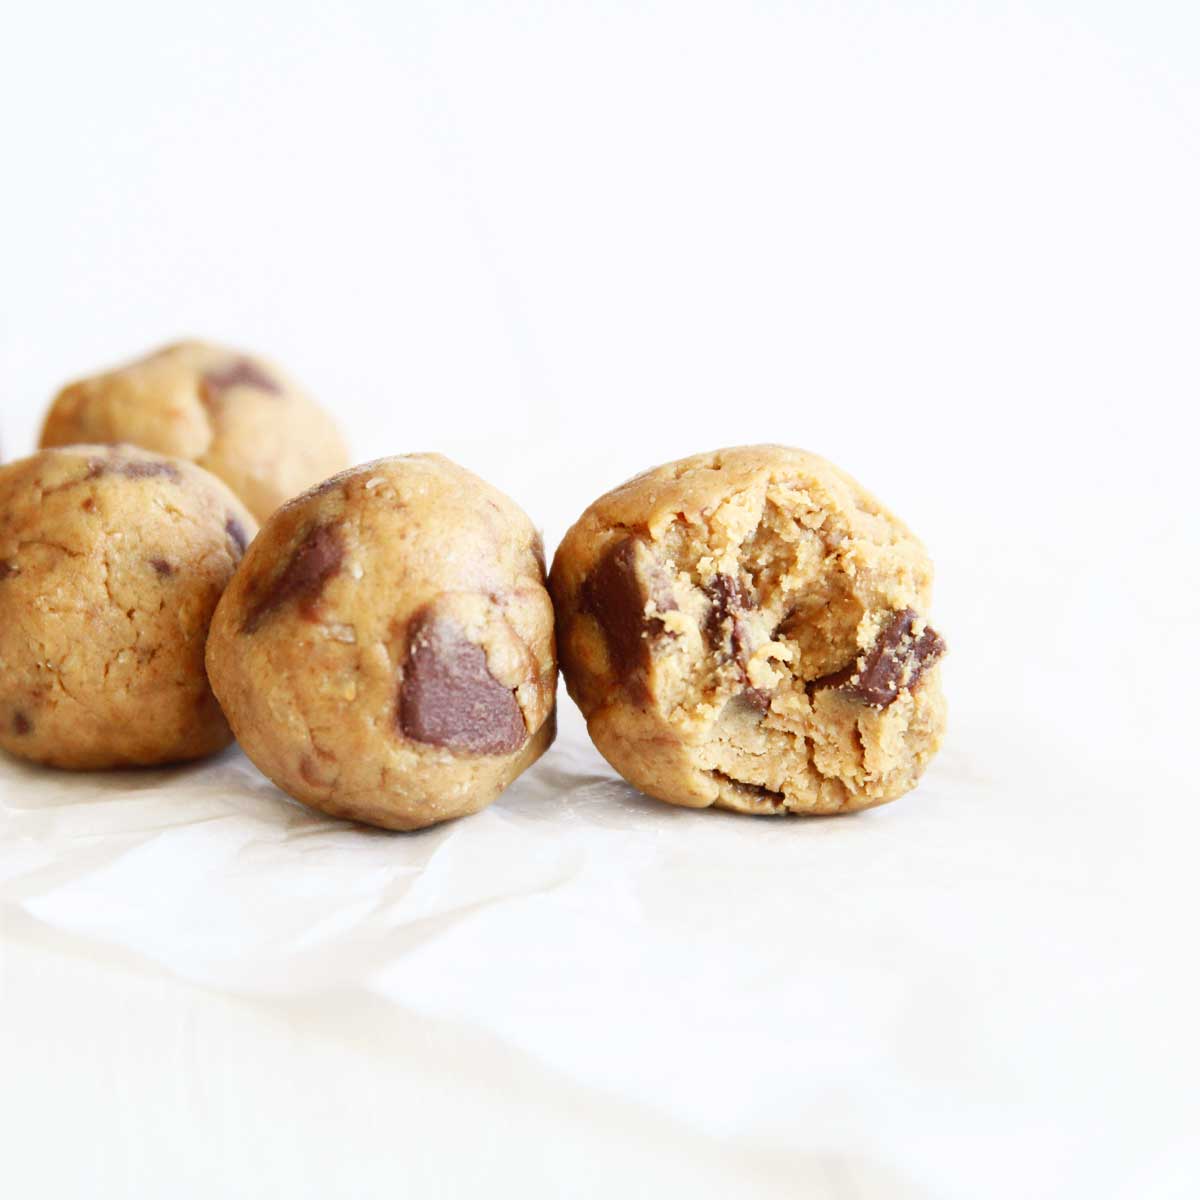 Peanut Butter Cookie Dough Protein Balls (No-Bake, Vegan Recipe with Oats) - Chocolate Protein Balls